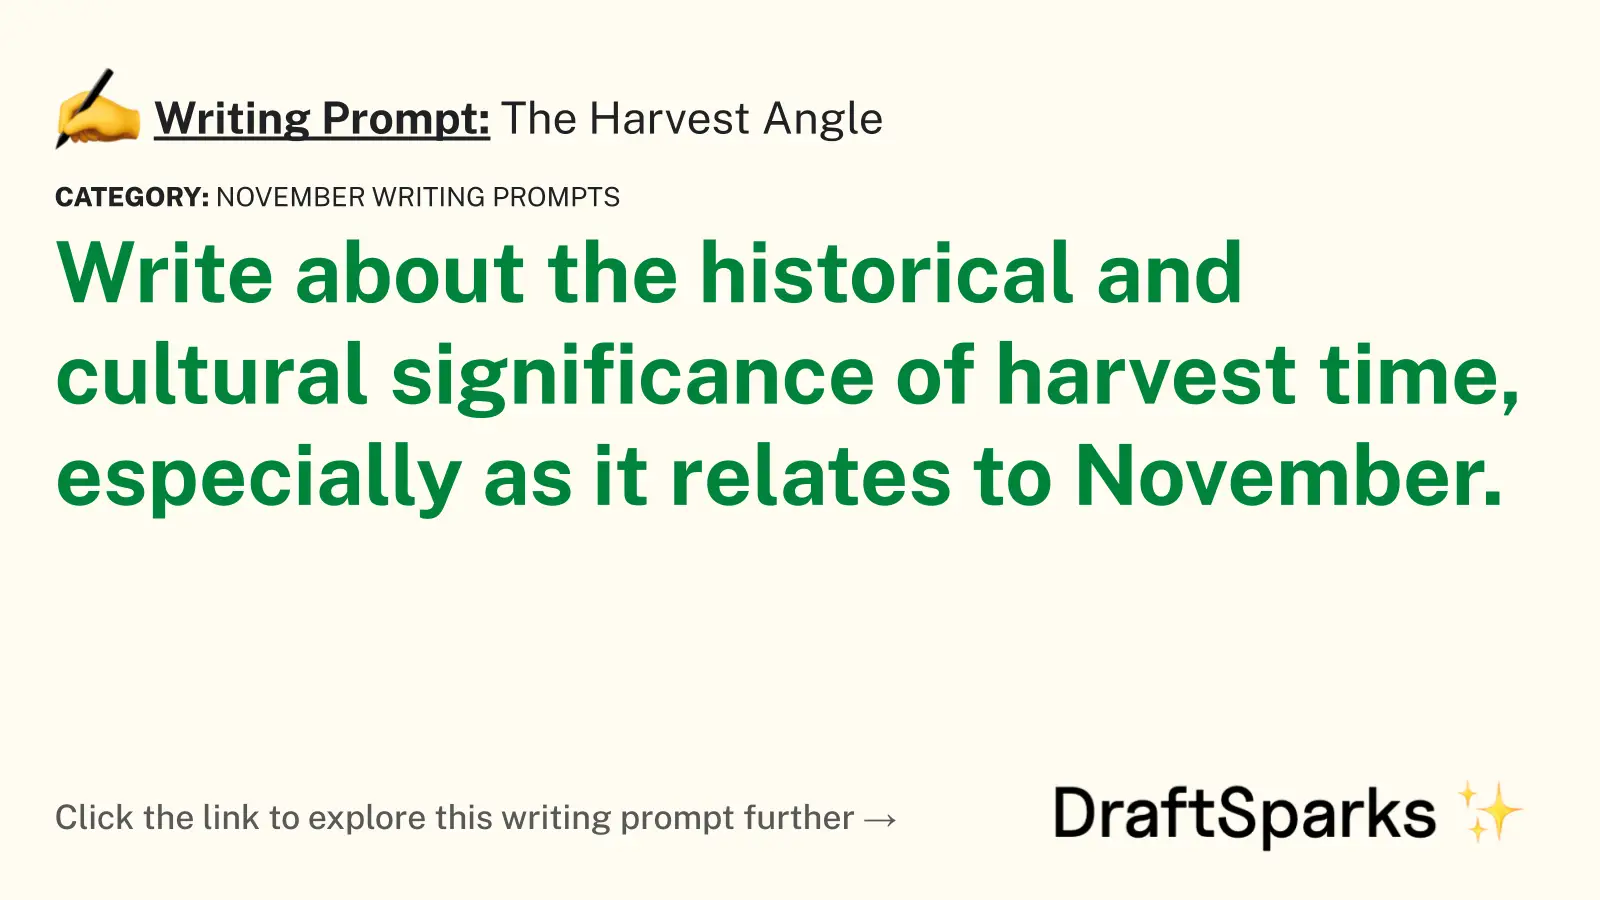 The Harvest Angle